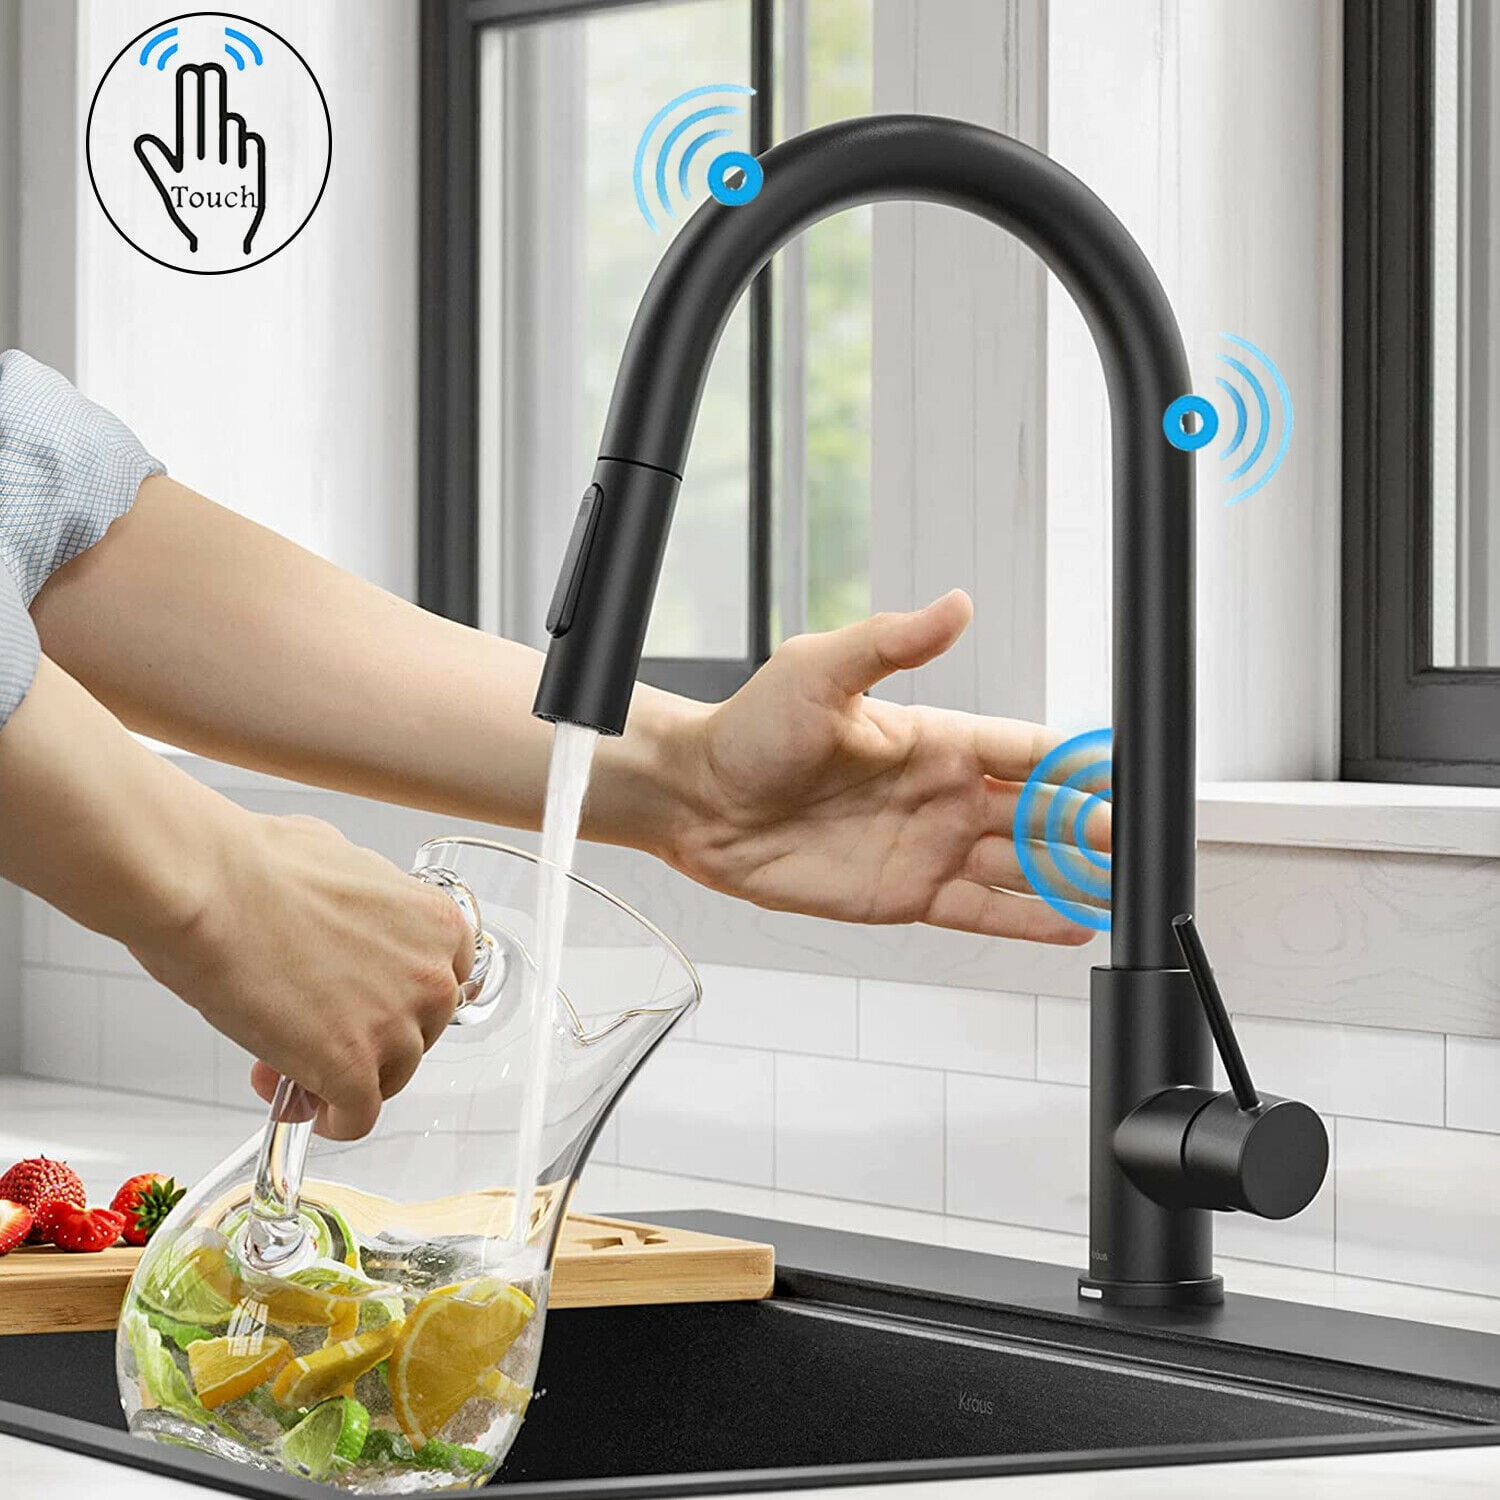 Automatic Touch Sensor Kitchen Faucet Pull Down Sprayer Sink Swivel Mixer Tap US 